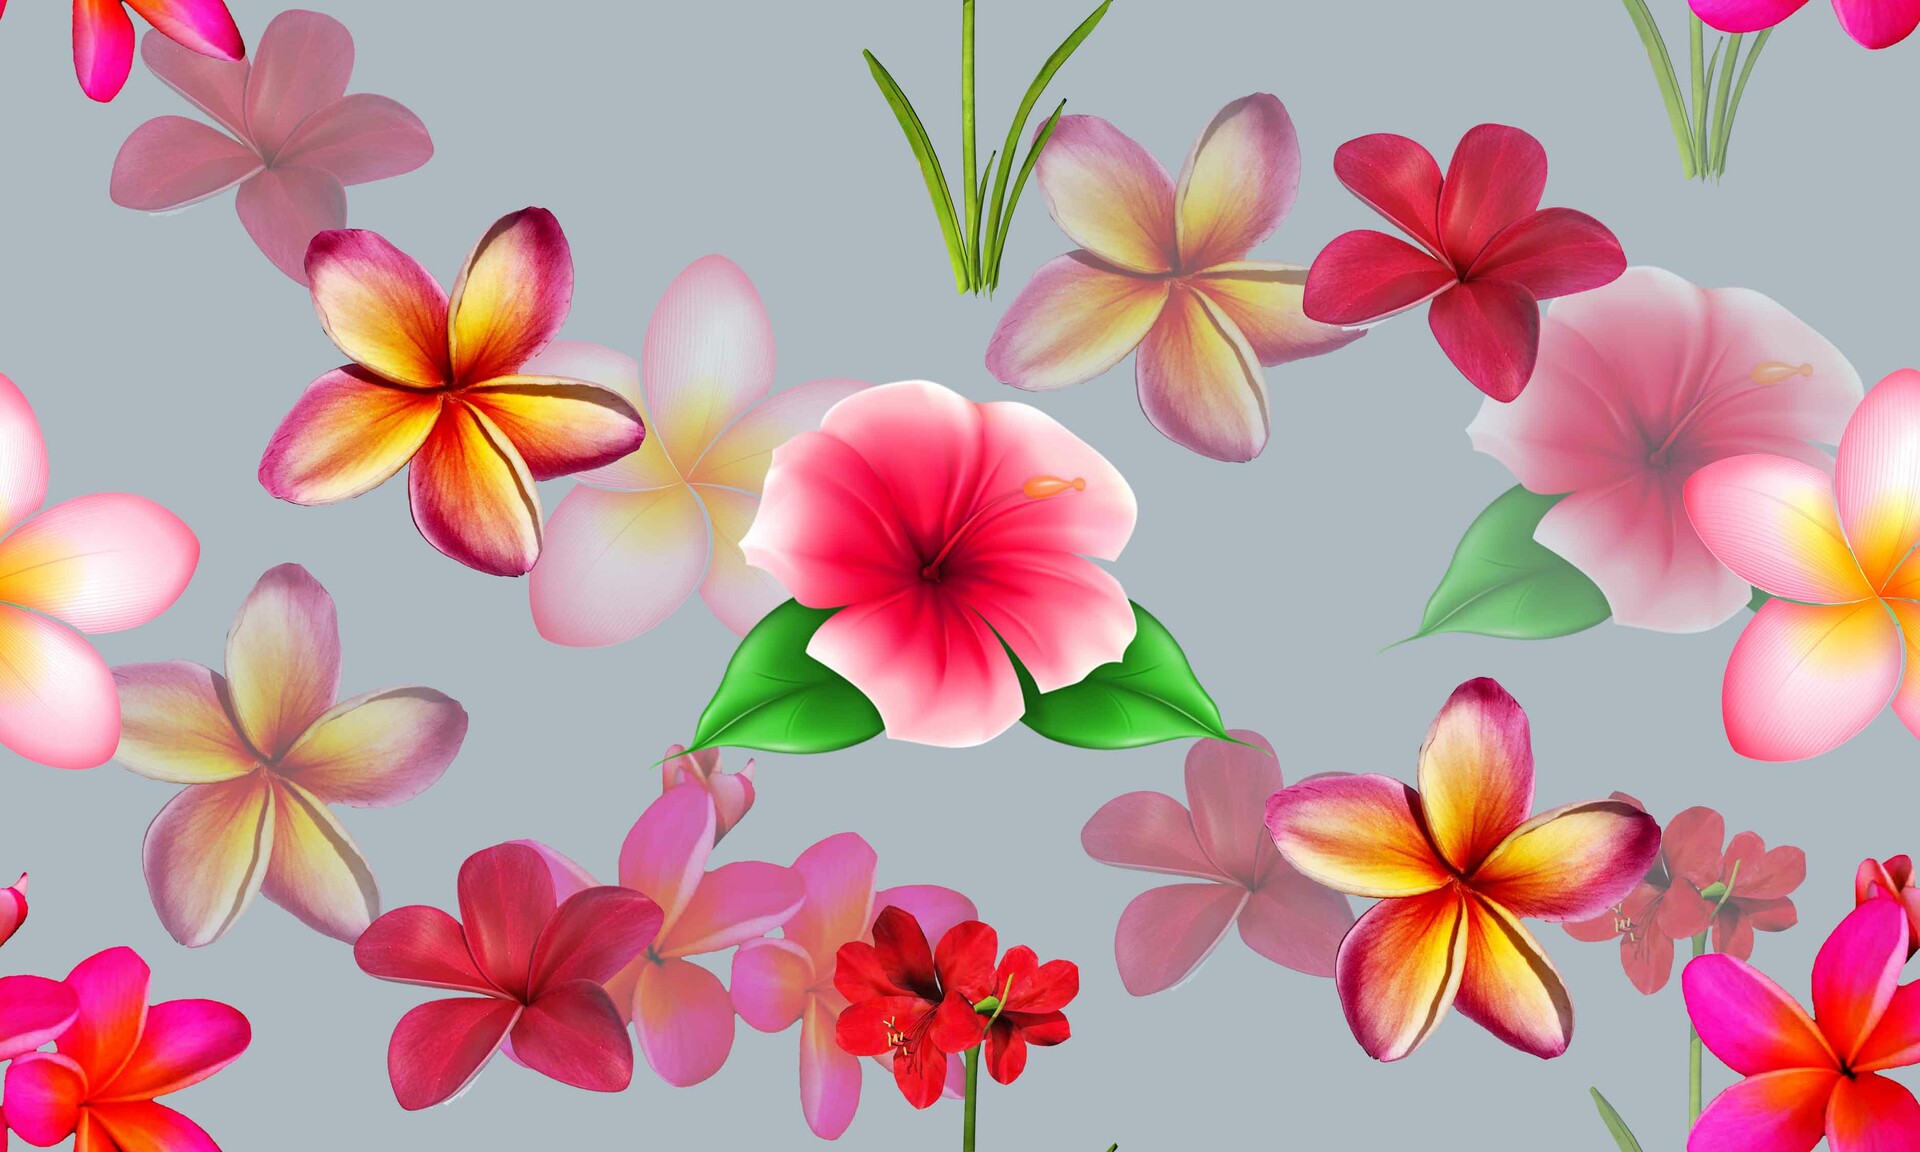 Cute pattern in small flower. Small colorful flowers., EON THE ART STUDIO EON THE ART STUDIO